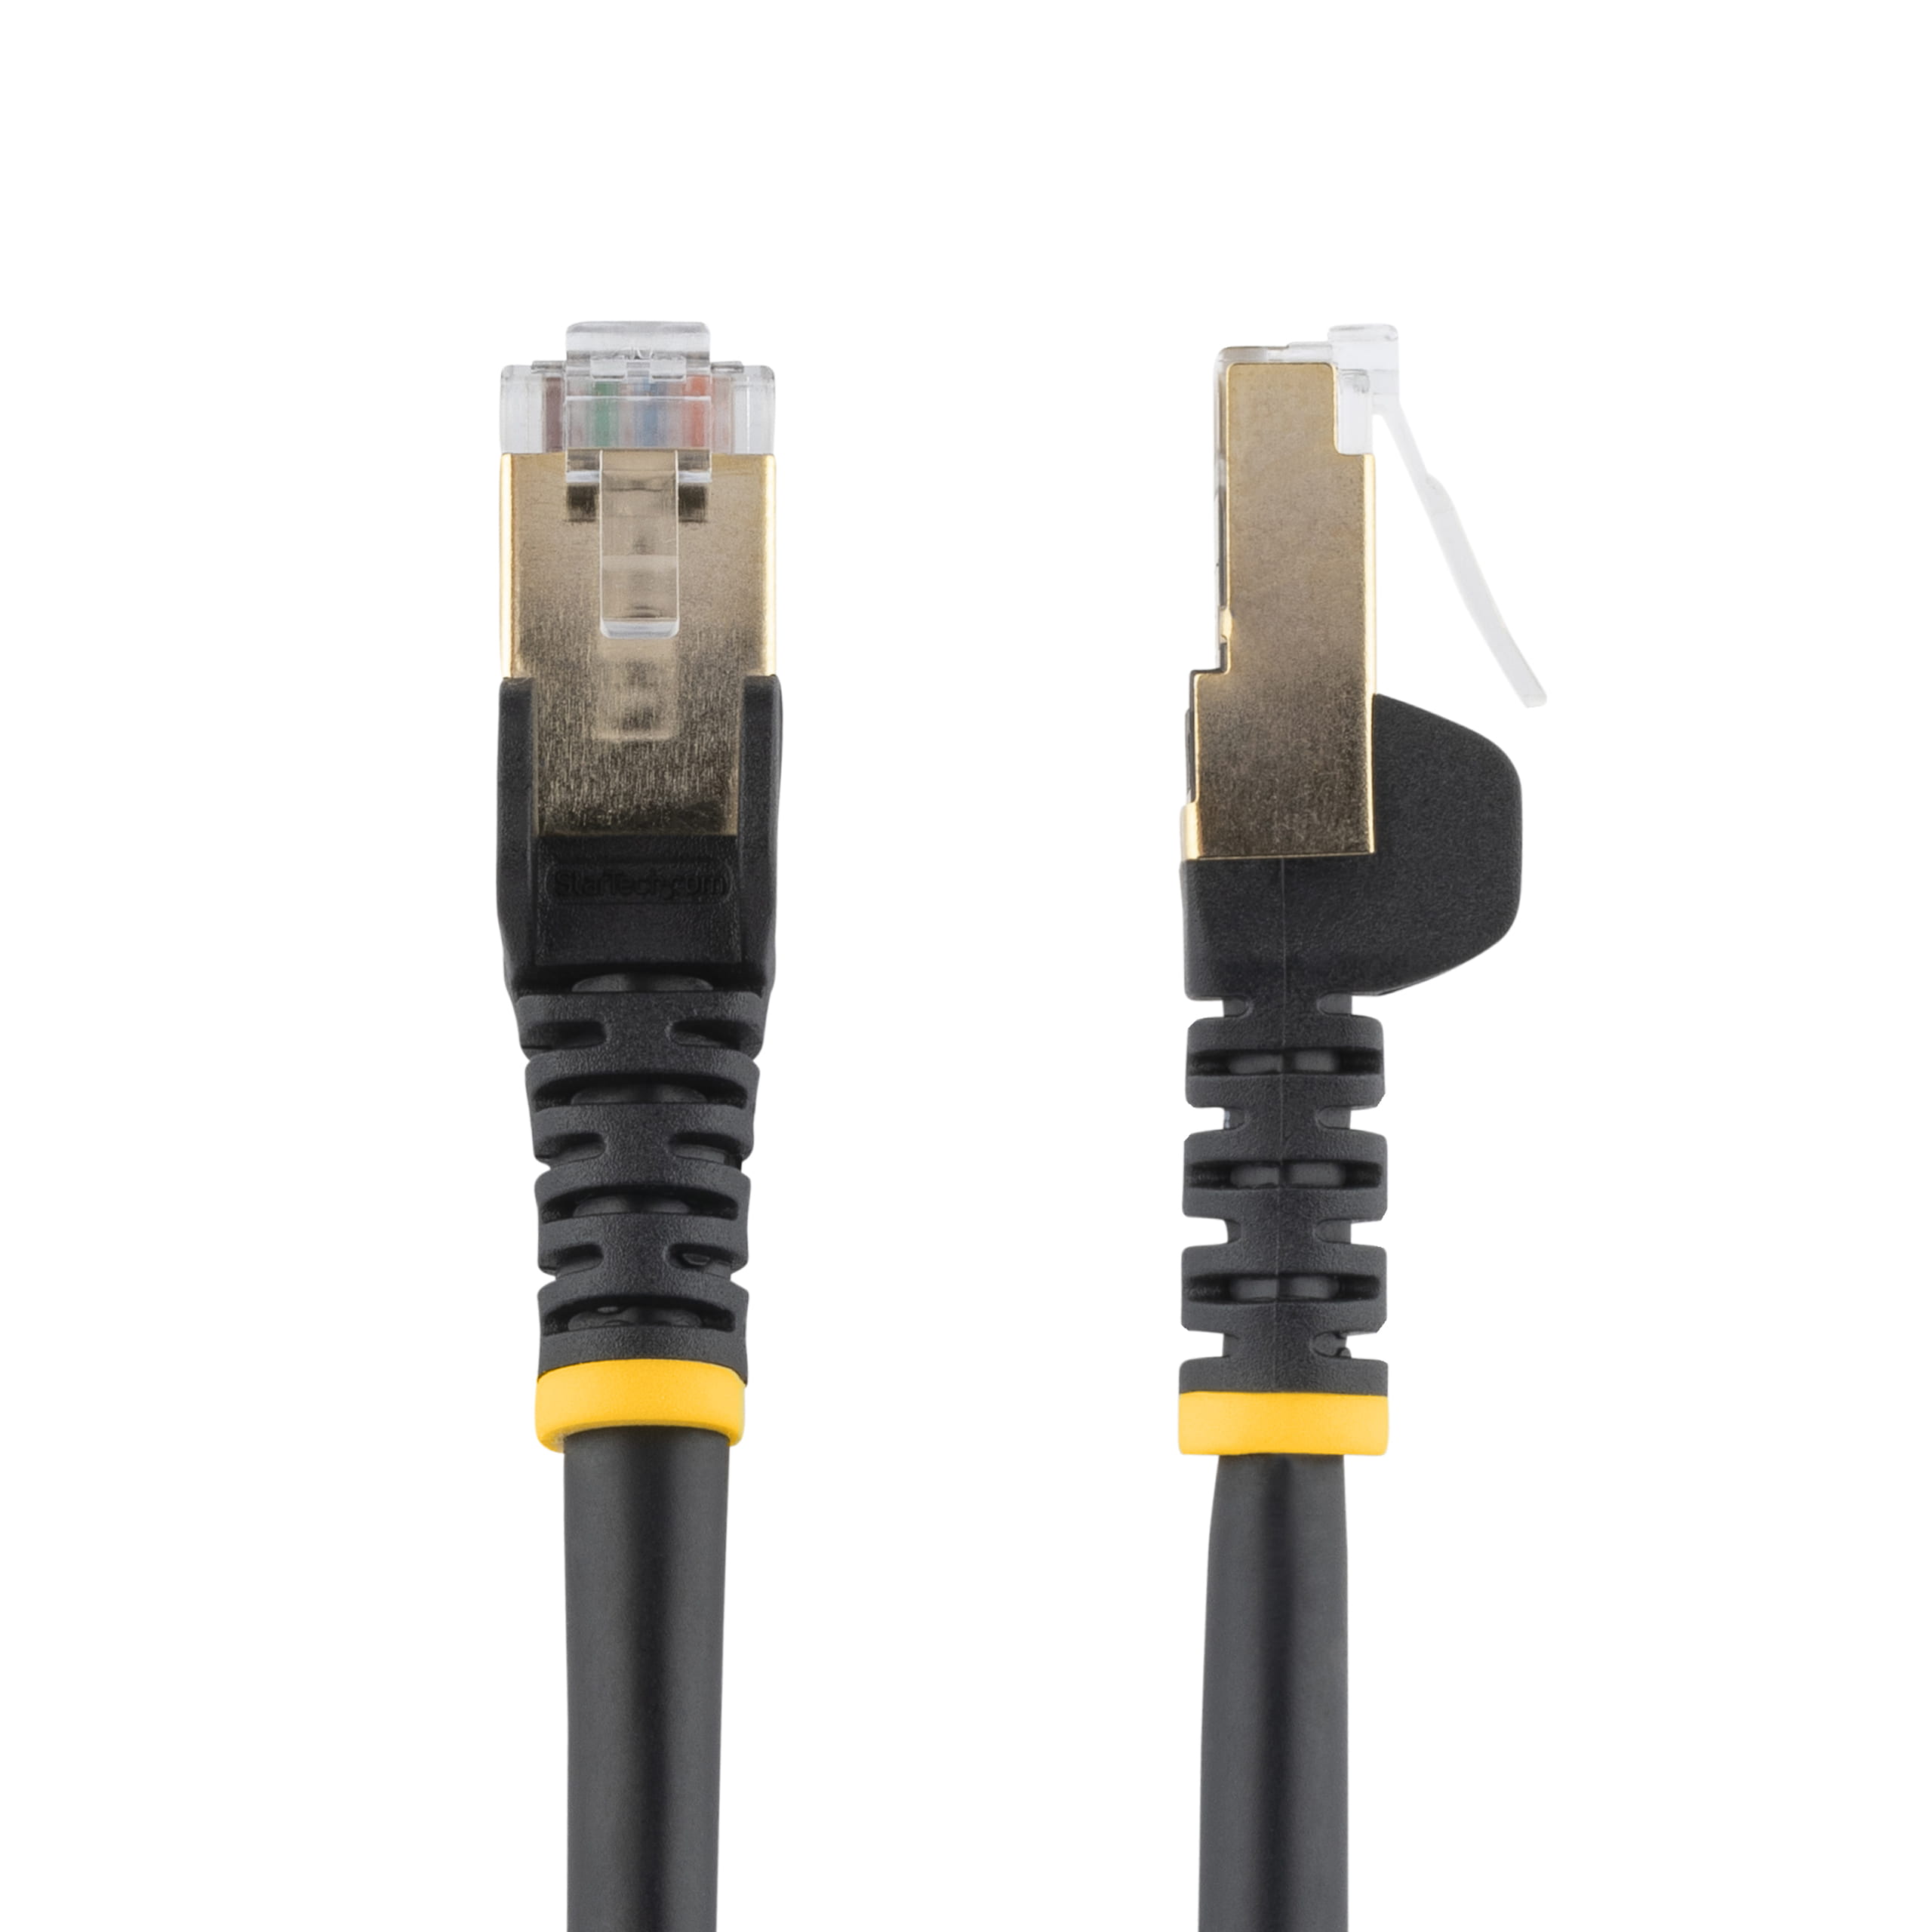 StarTech.com 3m CAT6A Ethernet Cable, 10 Gigabit Shielded Snagless RJ45 100W PoE Patch Cord, CAT 6A 10GbE STP Network Cable w/Strain Relief, Black, Fluke Tested/UL Certified Wiring/TIA - Category 6A - 26AWG (6ASPAT3MBK)